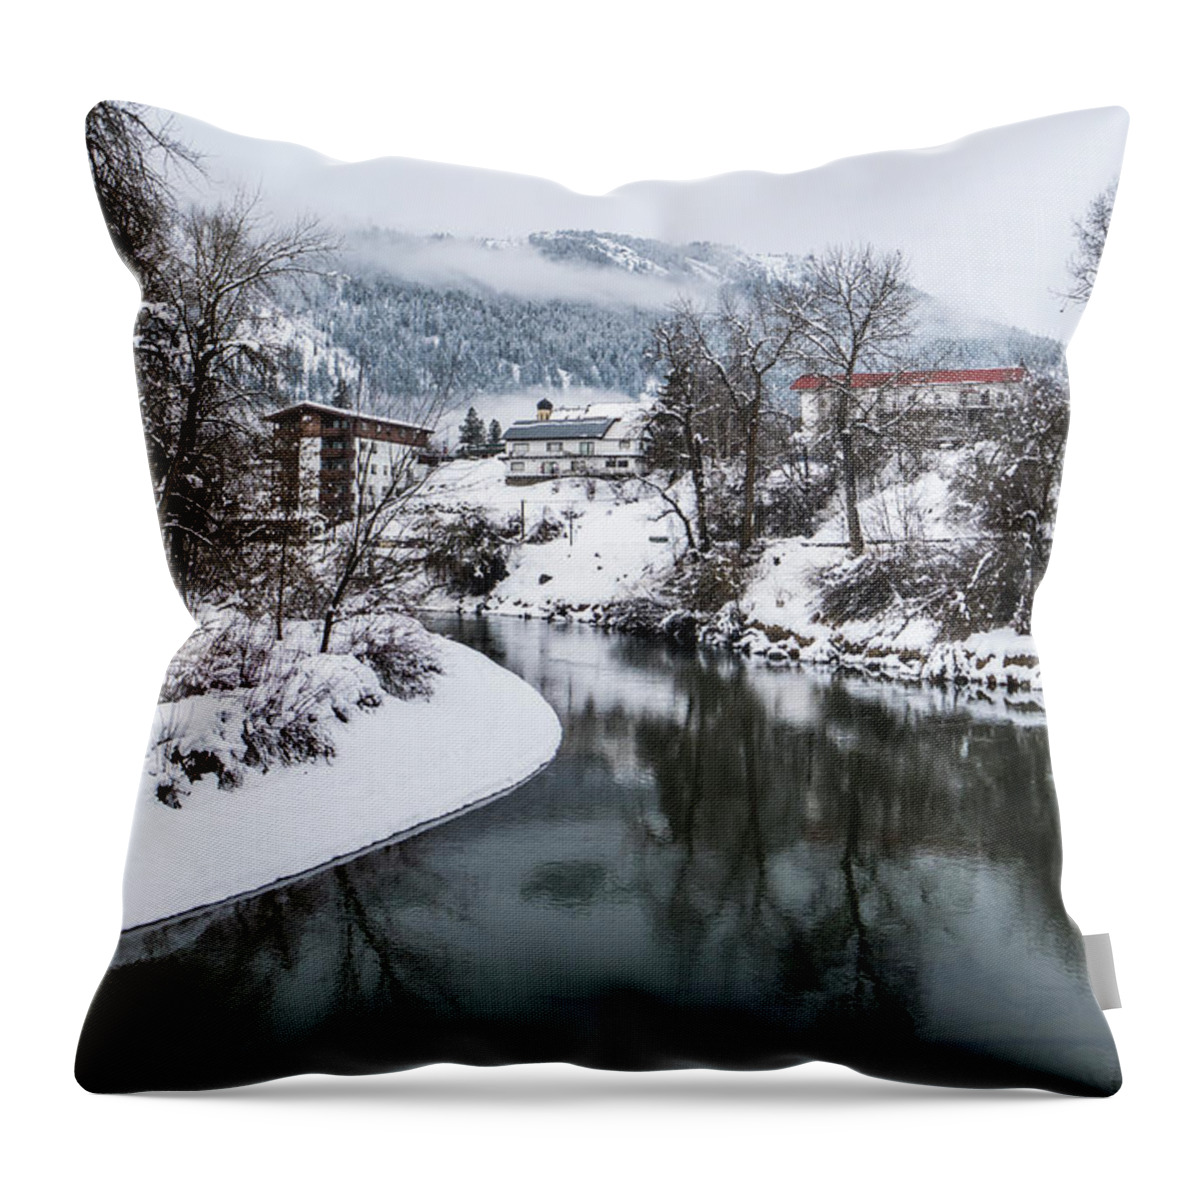 Leavenworth Throw Pillow featuring the photograph Leavenworth River Reflections by Matt McDonald